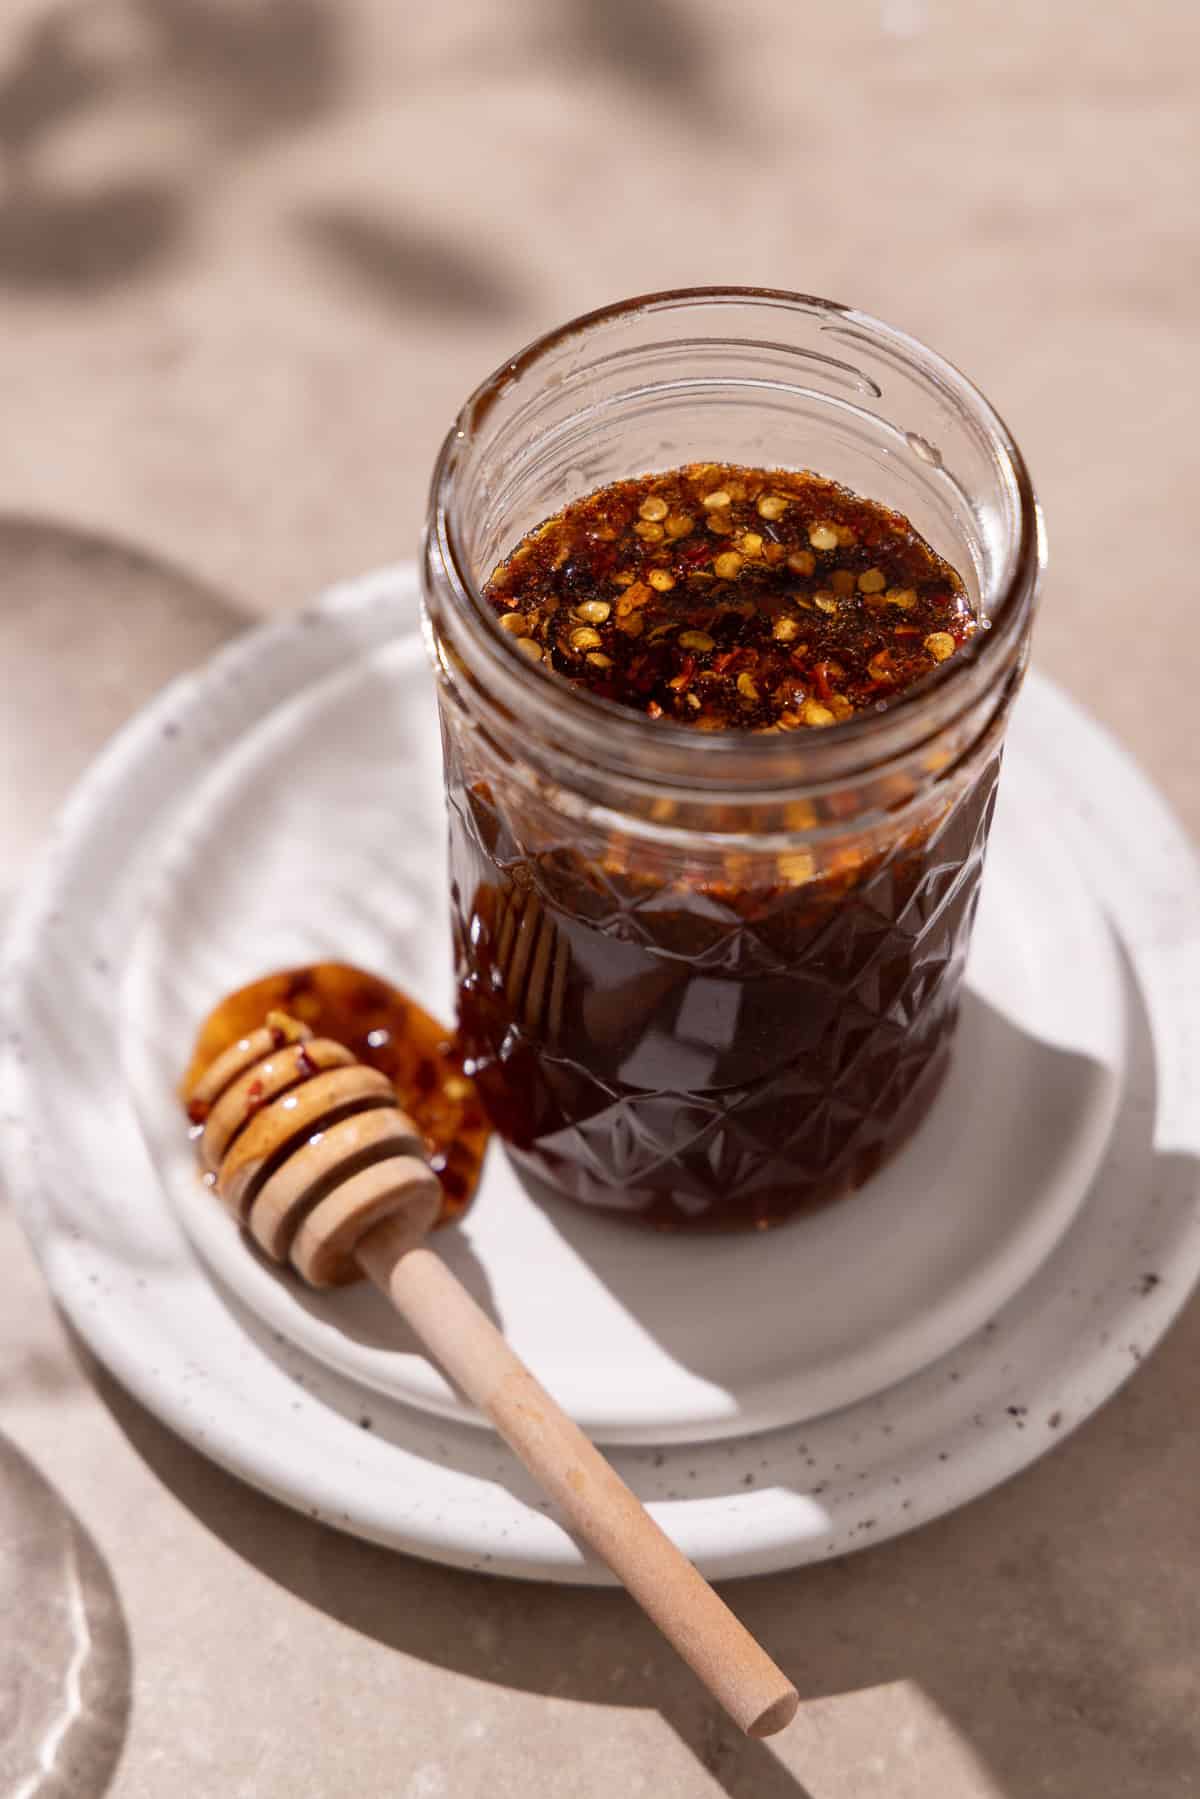 Hot honey is in a mason jar on top of 2 plates. A honey dipped sits next to the jar.